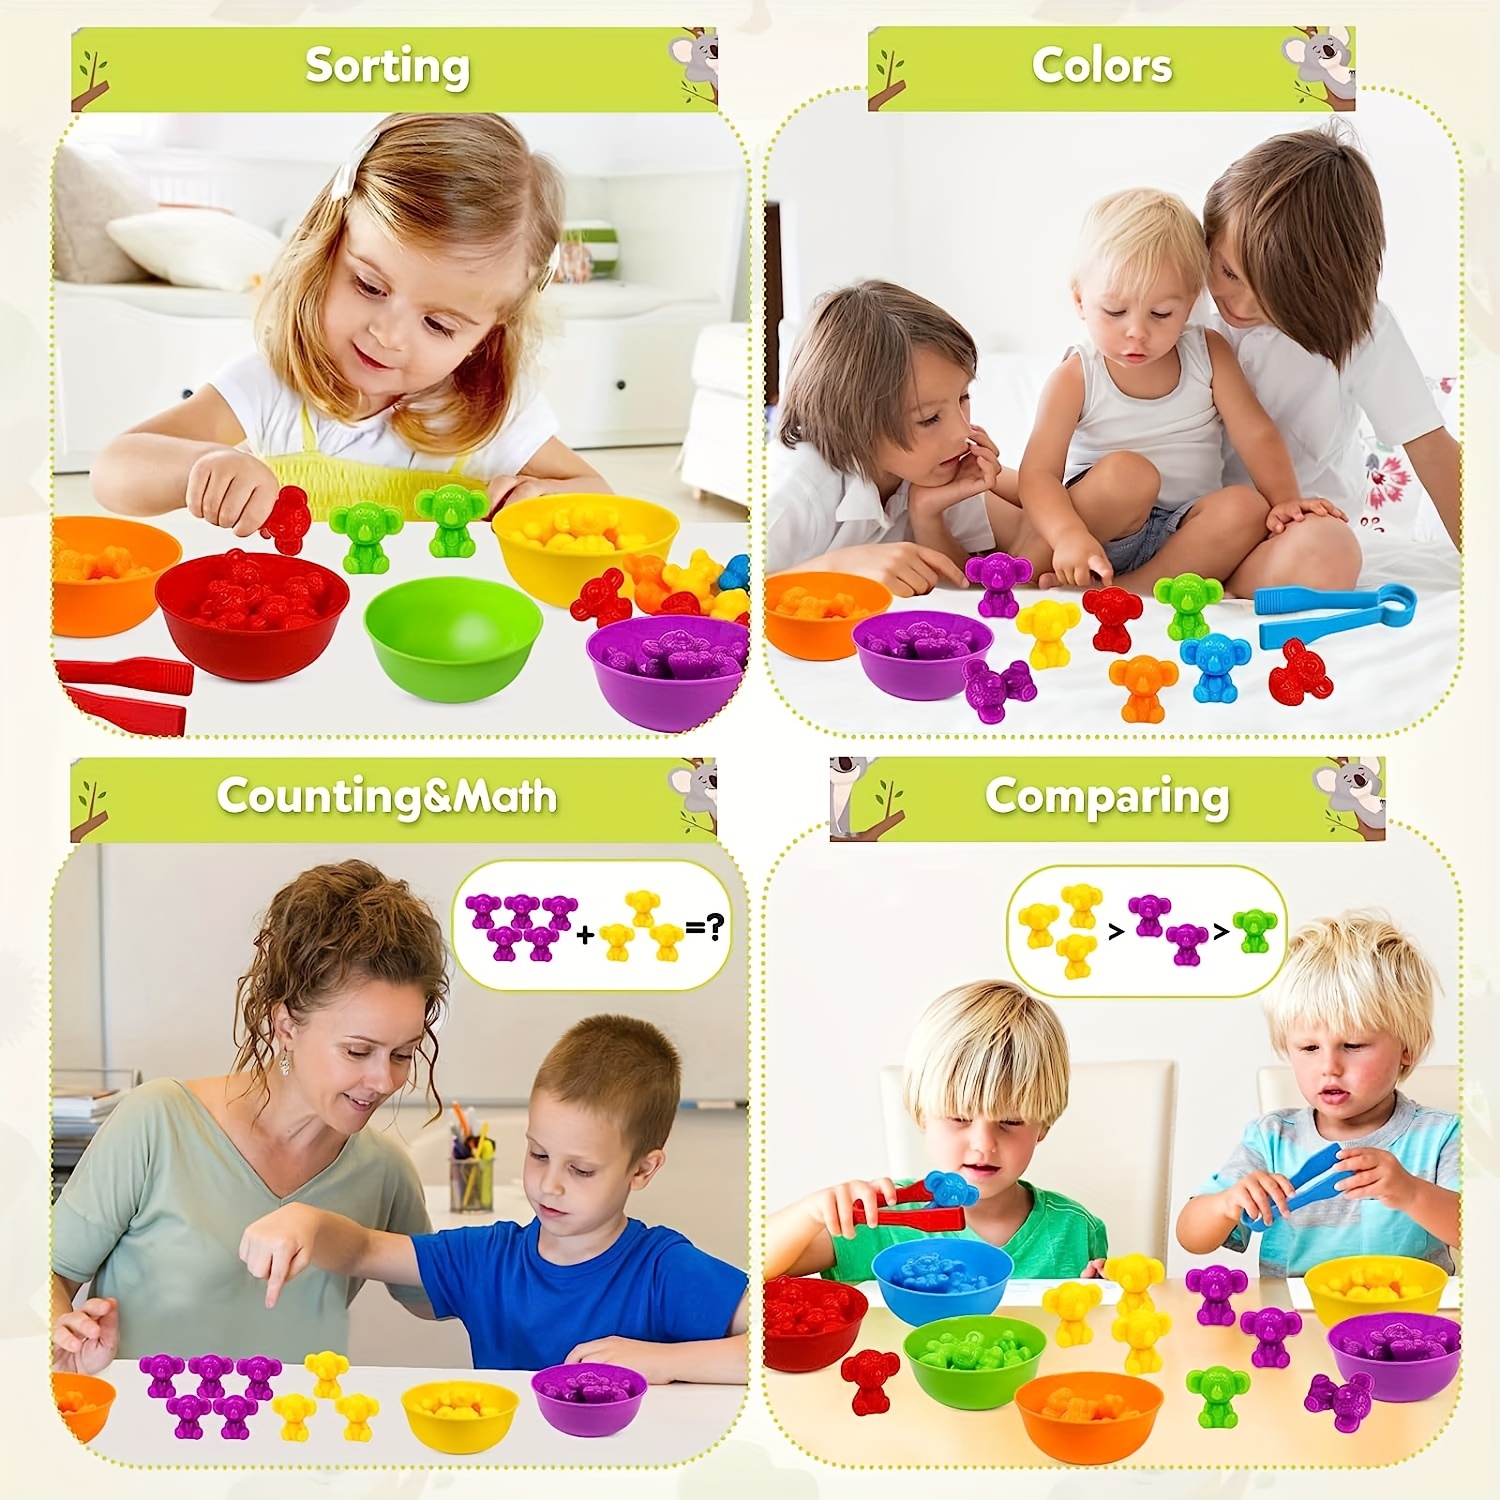 Counting Matching Game with Sorting Cups Color Classification and